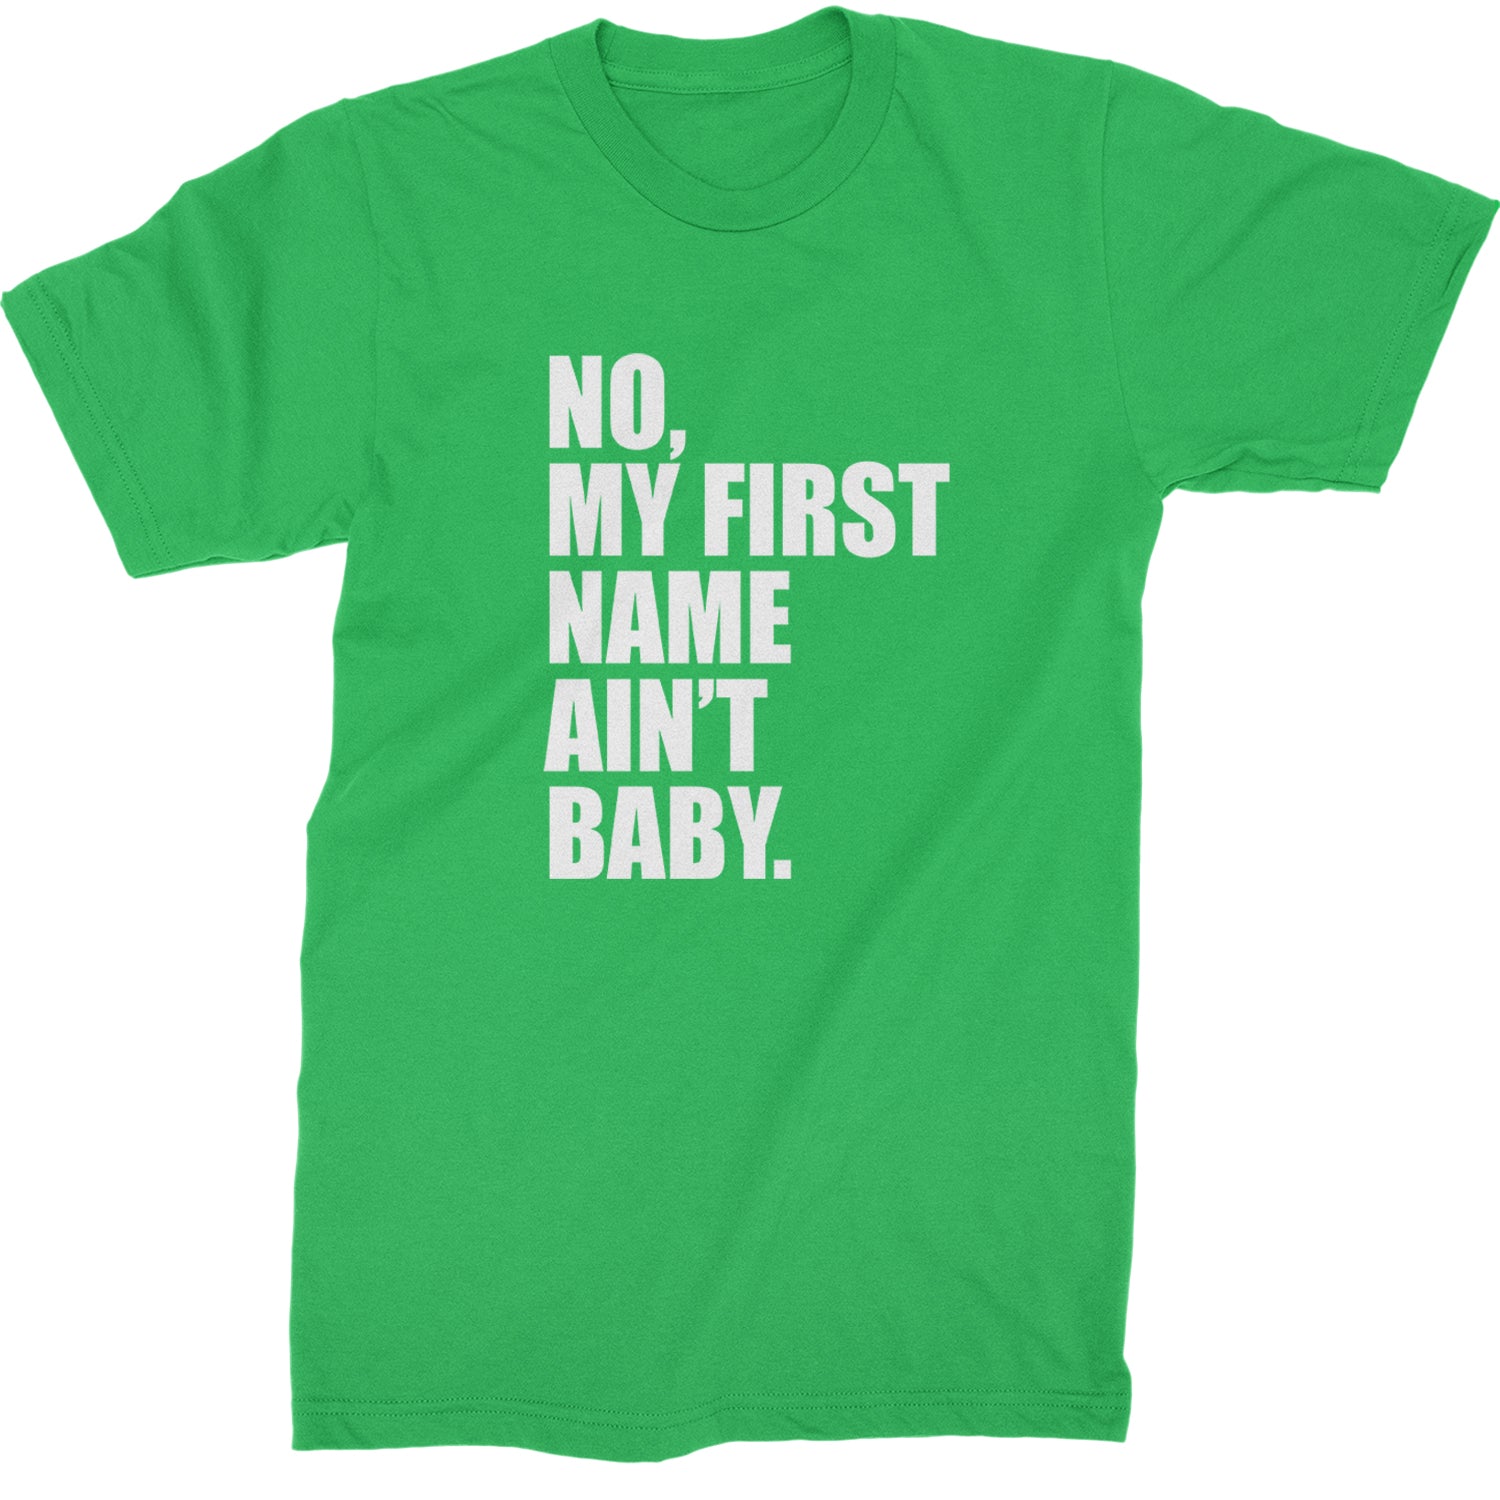 No My First Name Ain't Baby Together Again Mens T-shirt Kelly Green